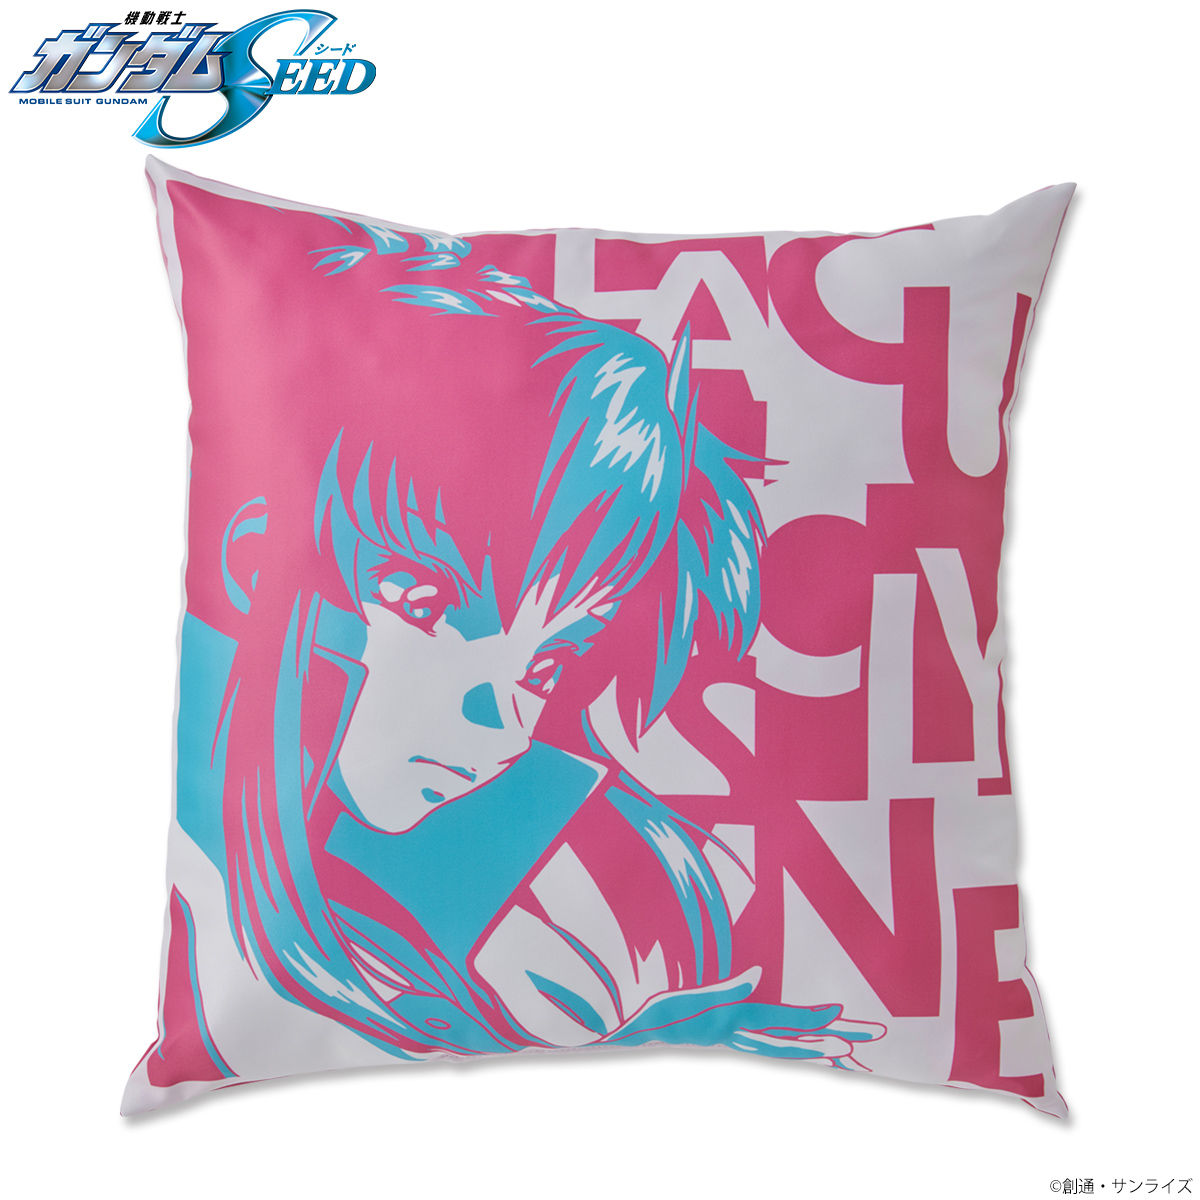 Mobile Suit Gundam SEED Tricolor-themed Pillow